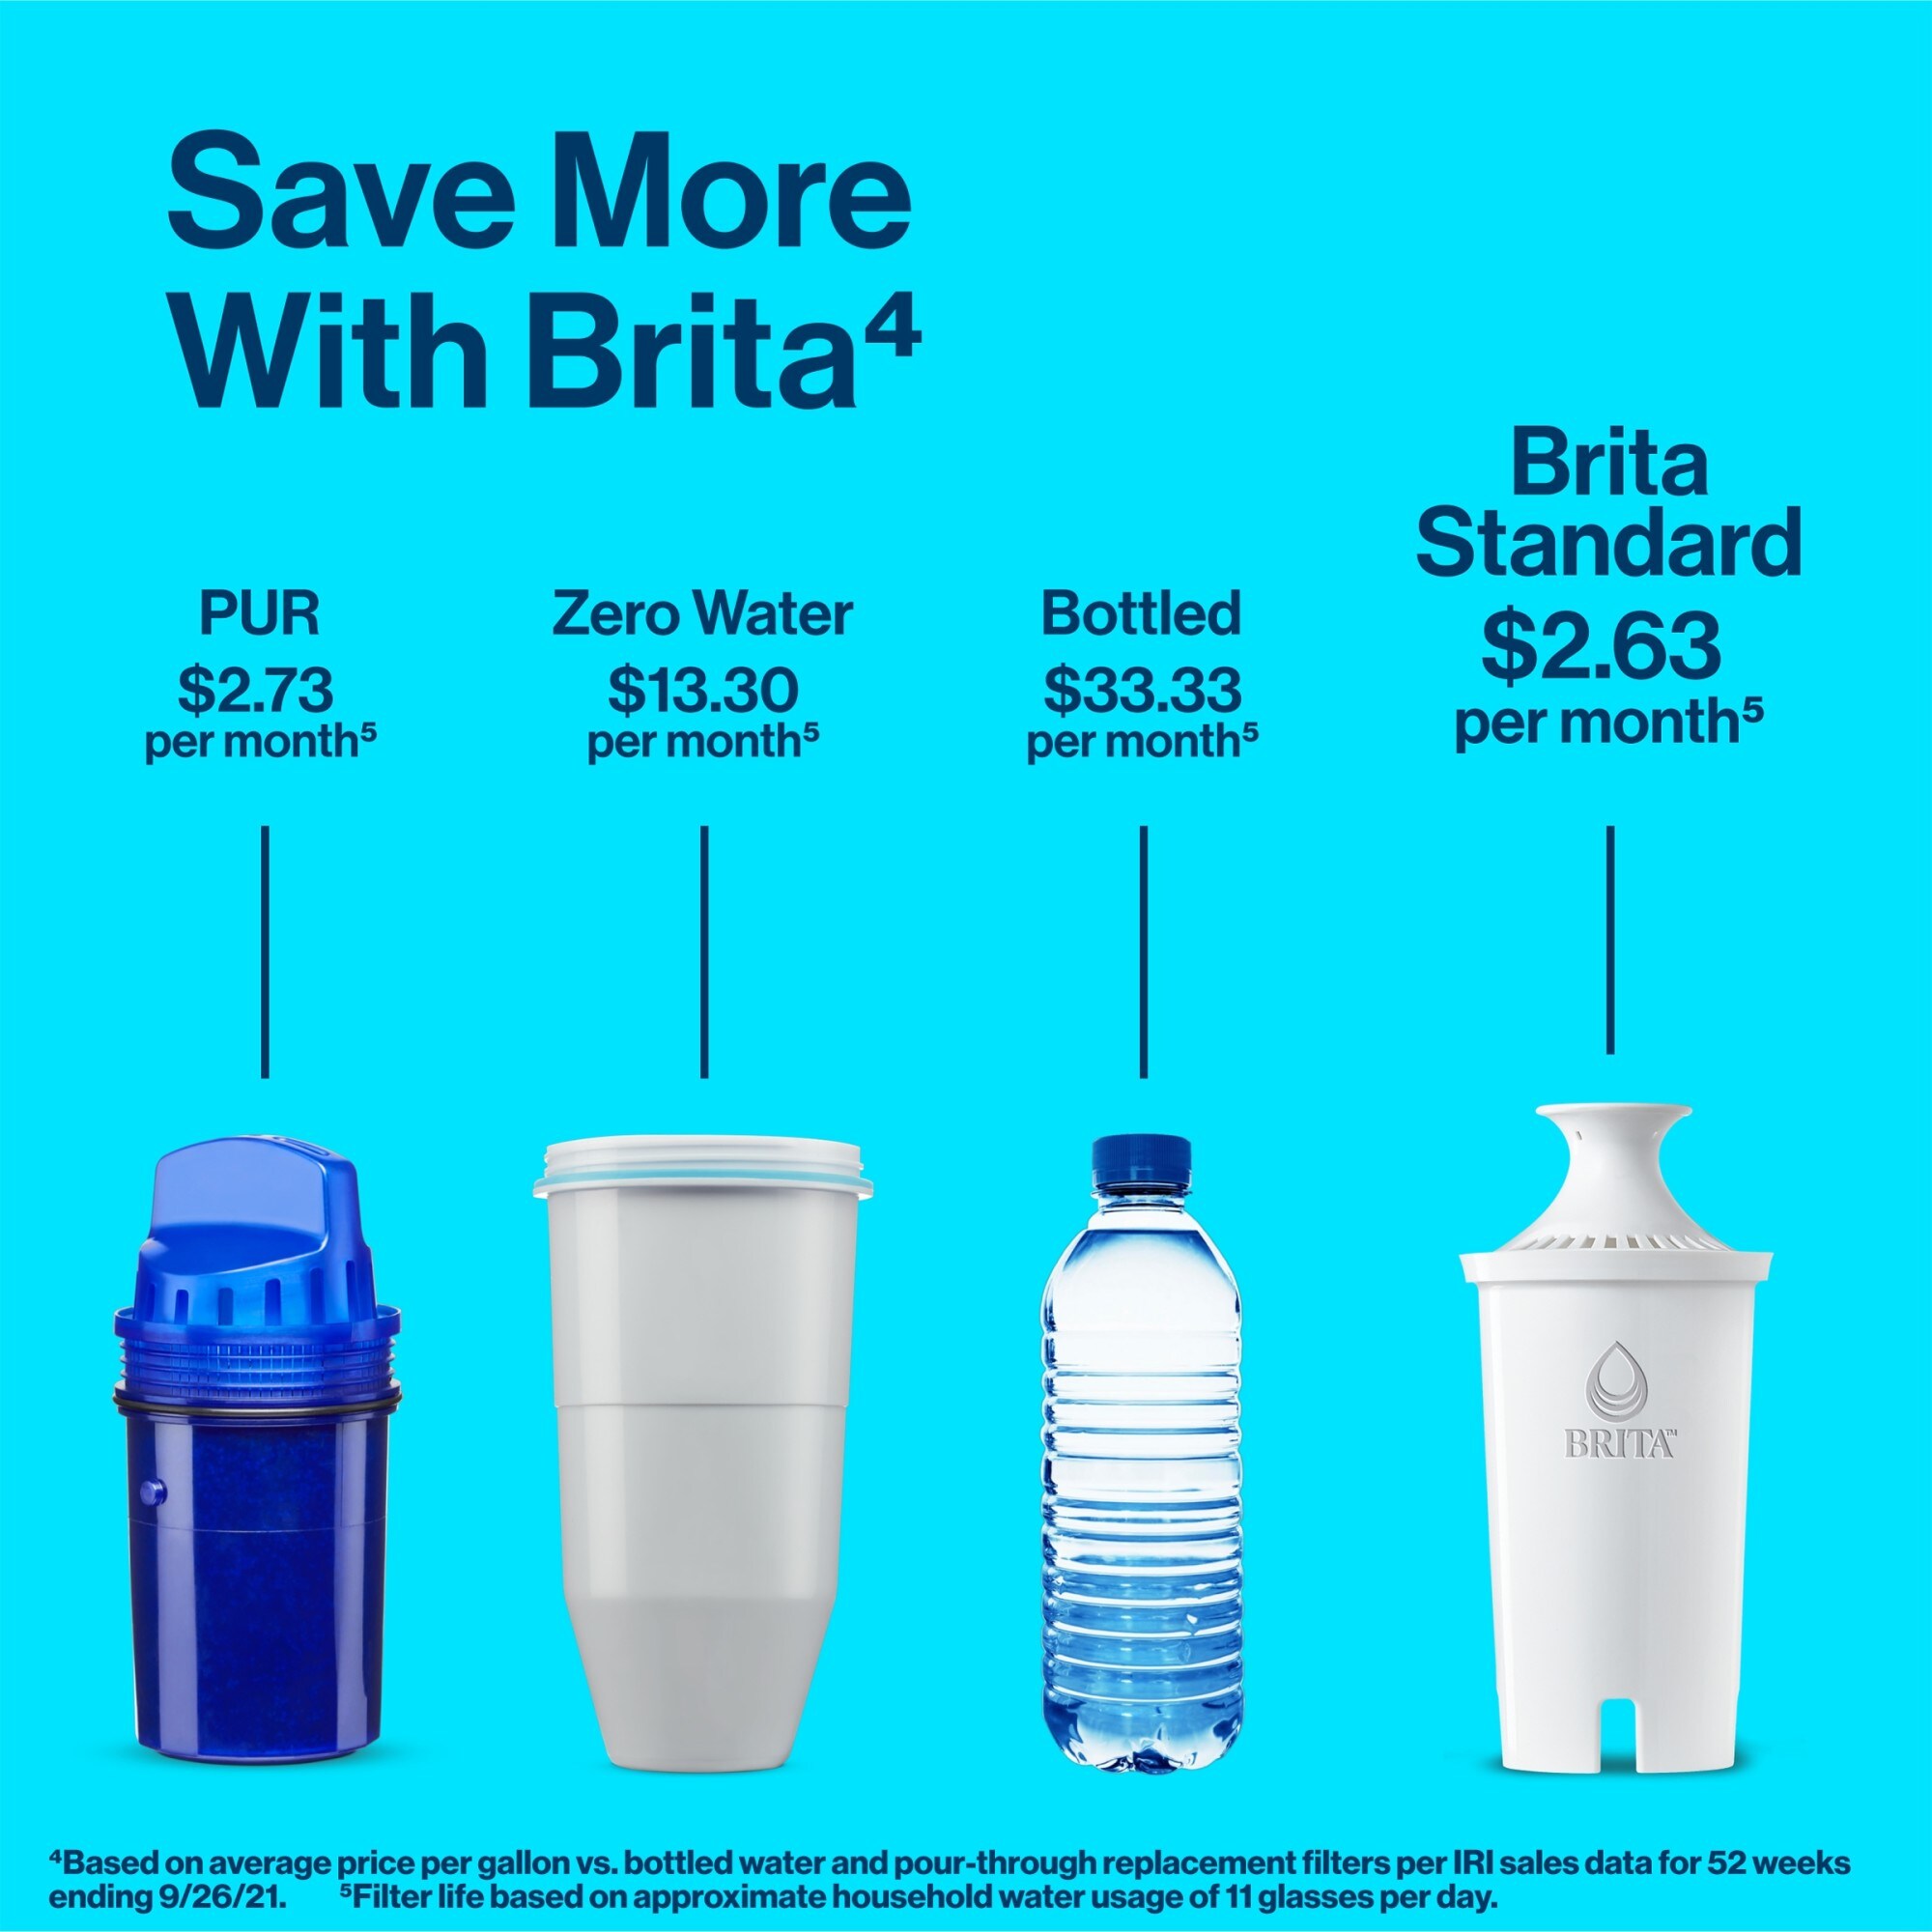  Commercial Cool CCWFB6 Brita Water Filter Replacements